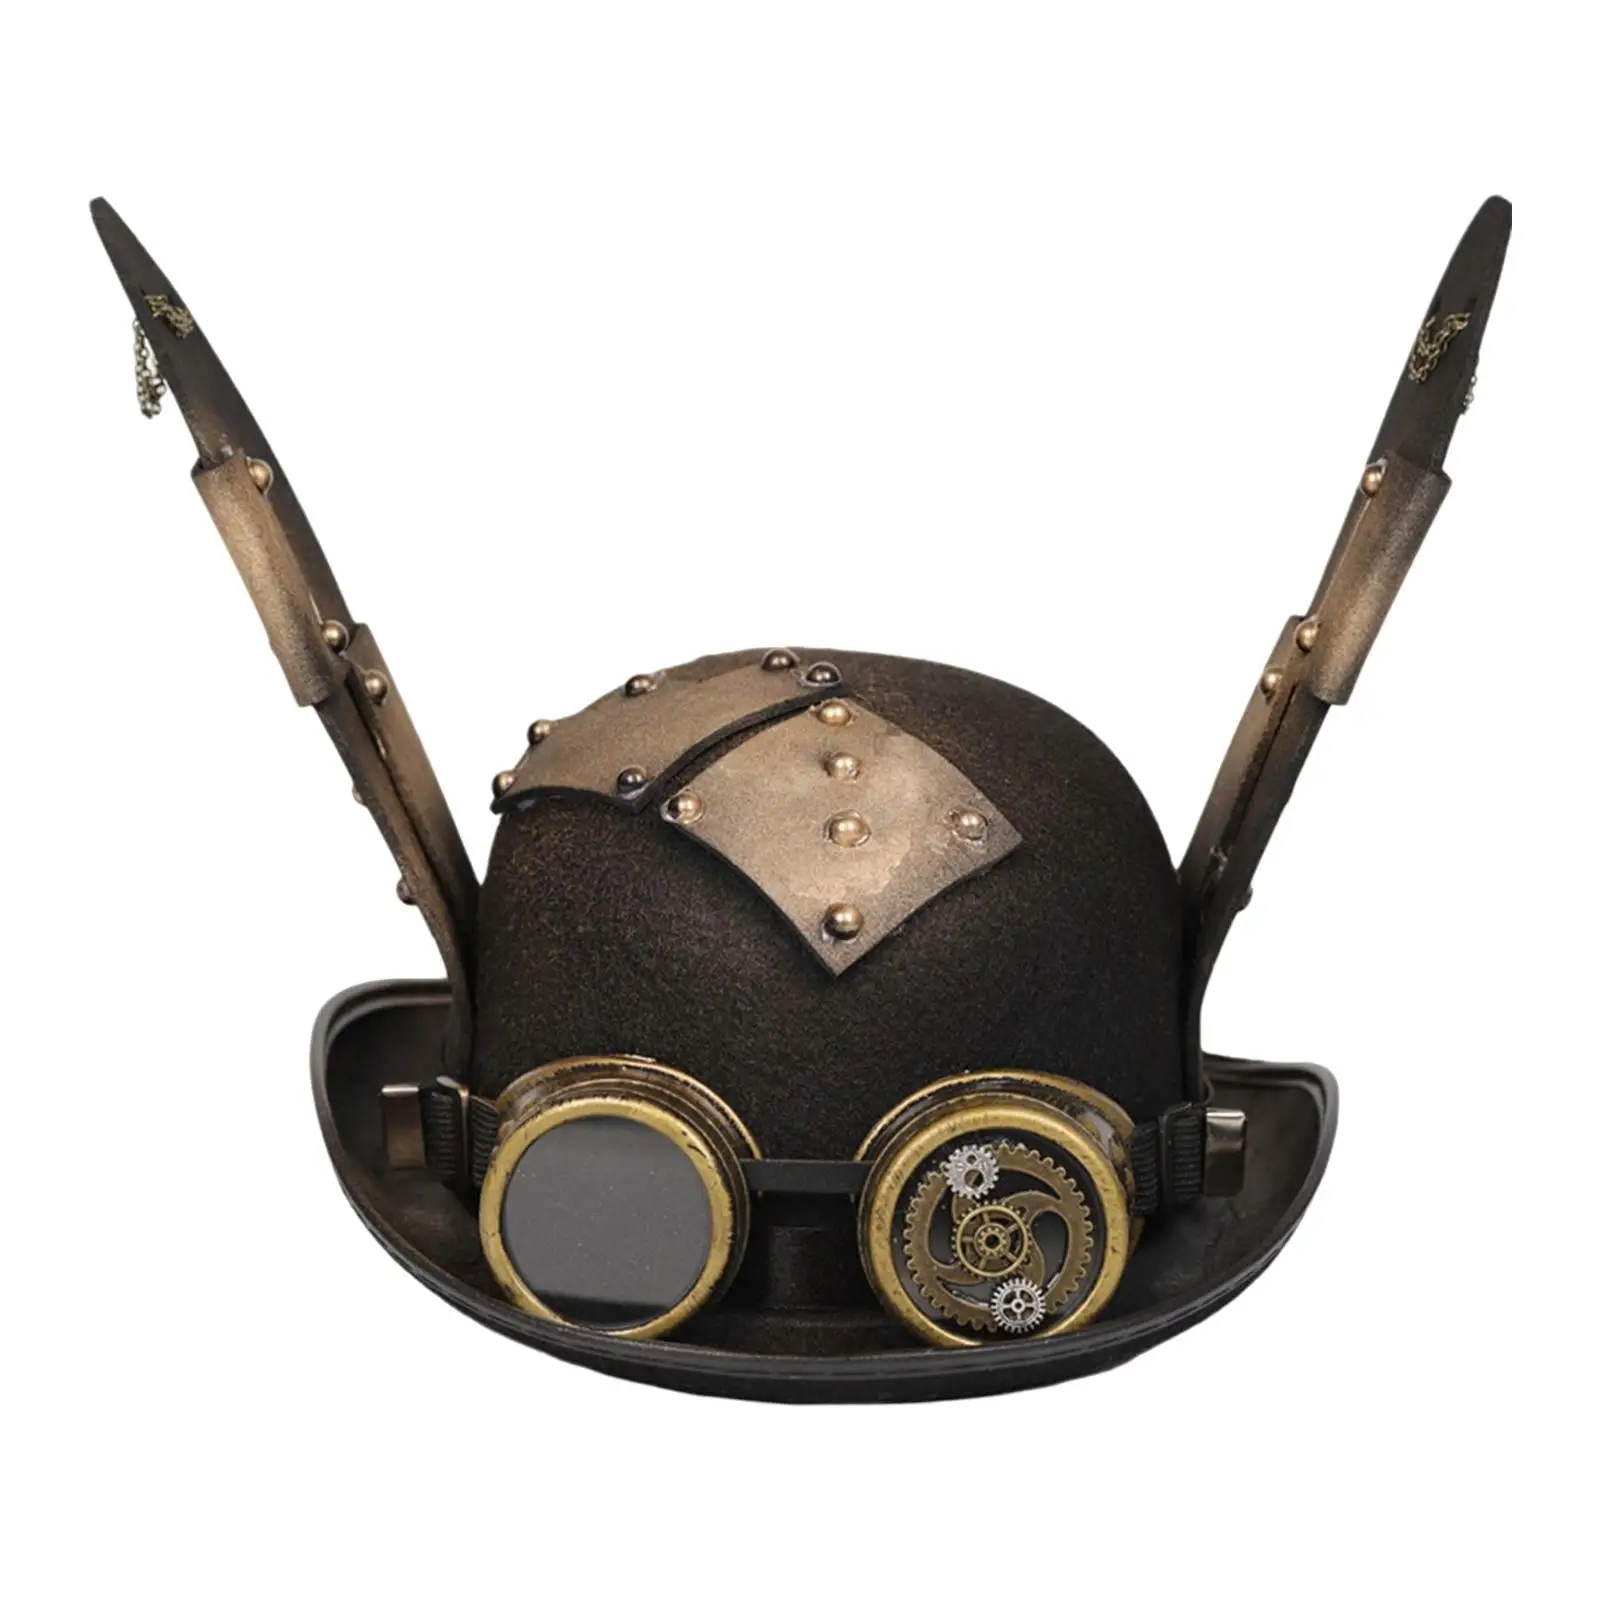 Elegant Steampunk Goggles Black Top Hat Unisex with Bunny Ears Costume Party Cosplay Costume Retro Steampunk Goggles Glasses